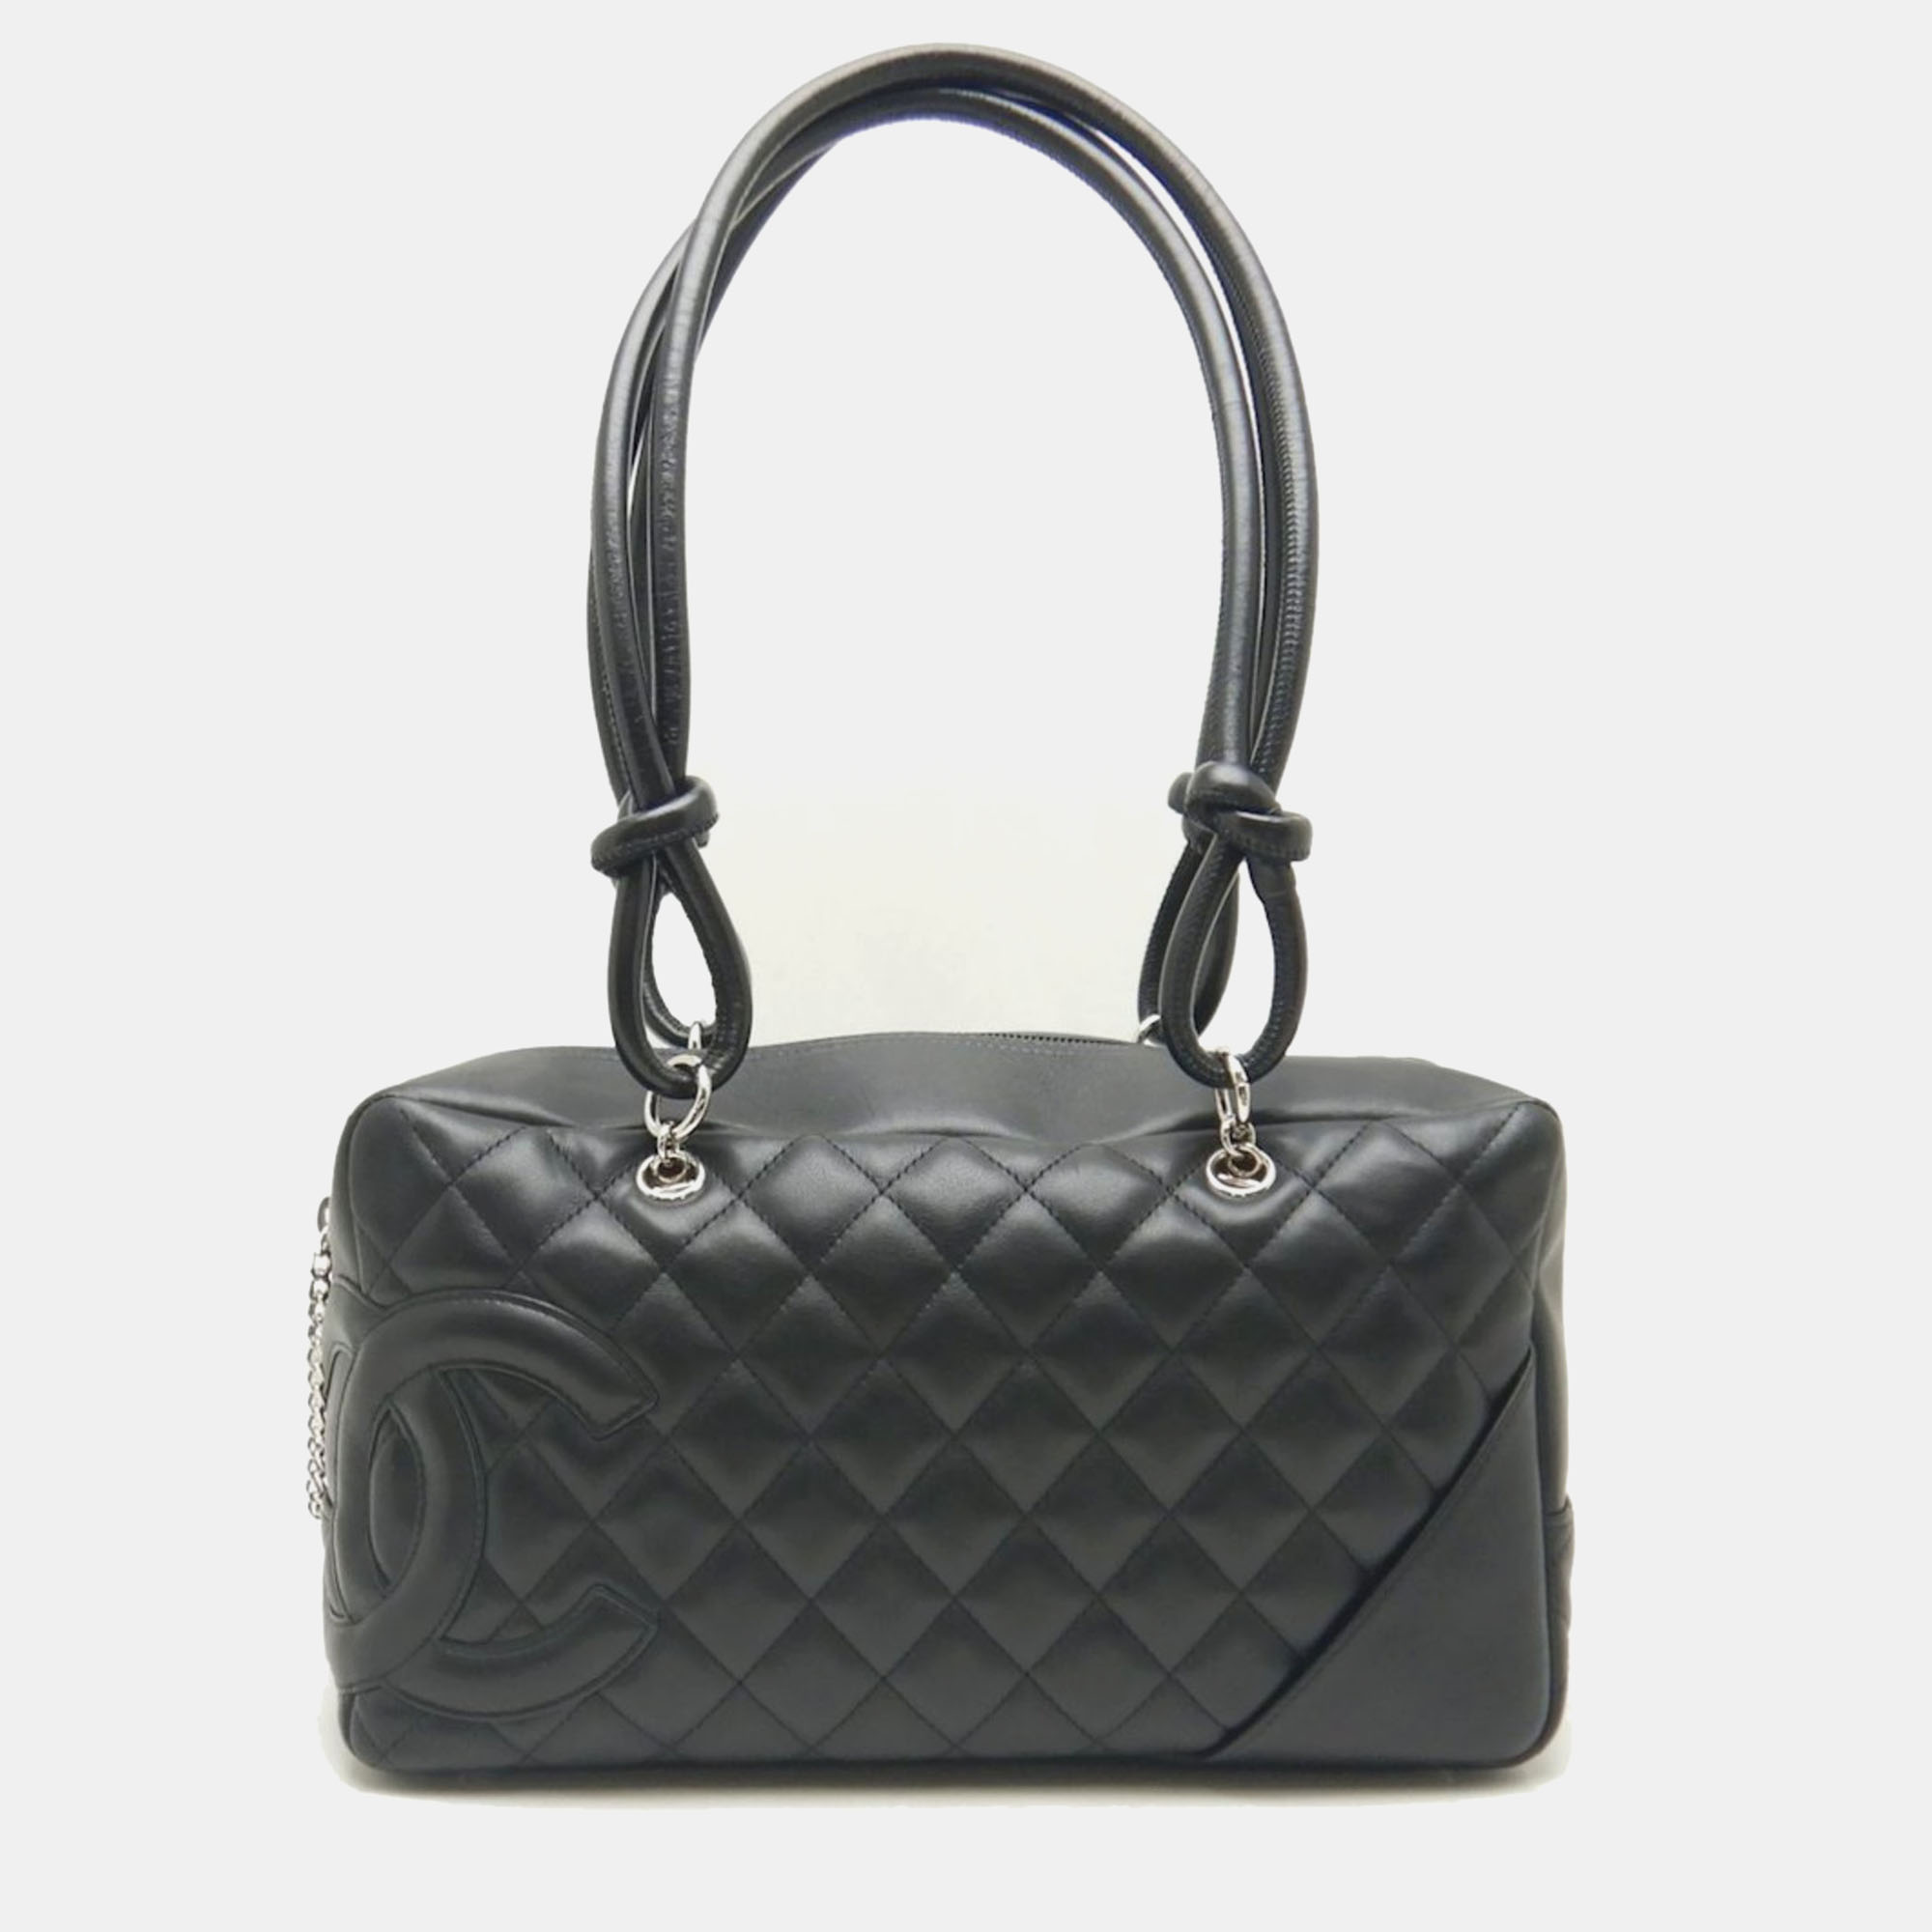 

Chanel Black Calfskin Quilted Large Cambon Bowler Bag